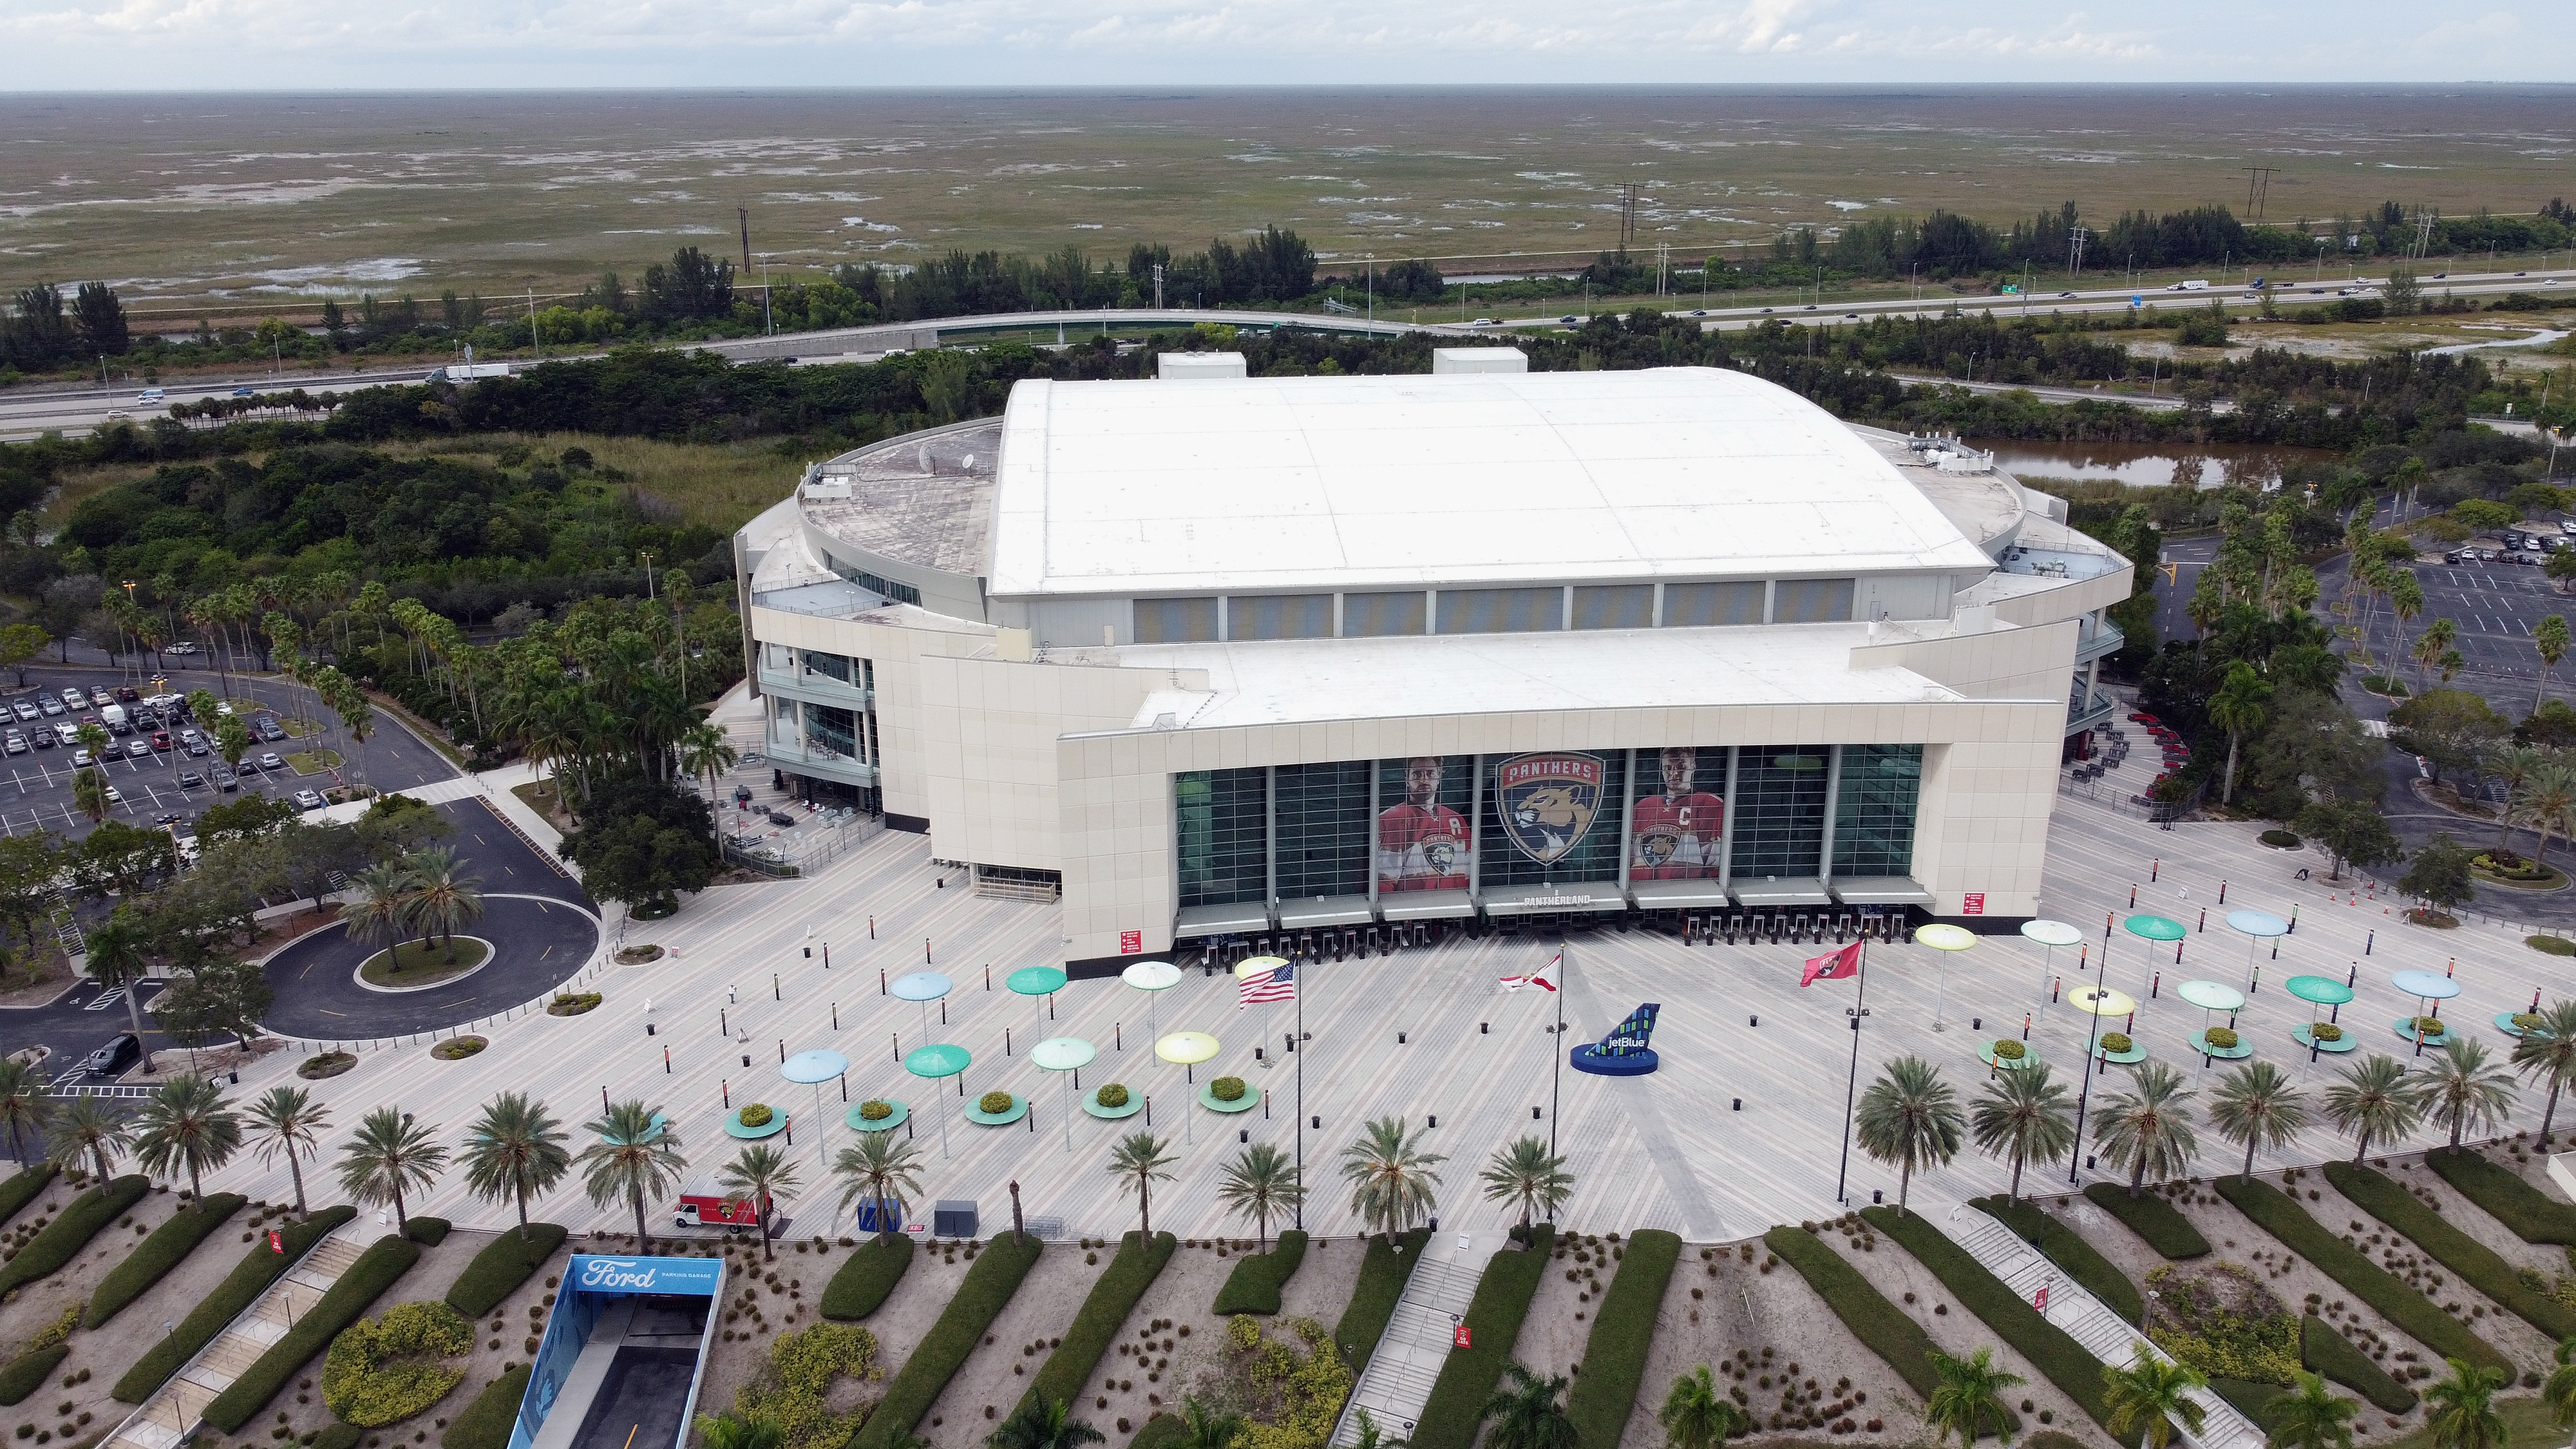 Panther's Arena in Sawgrass